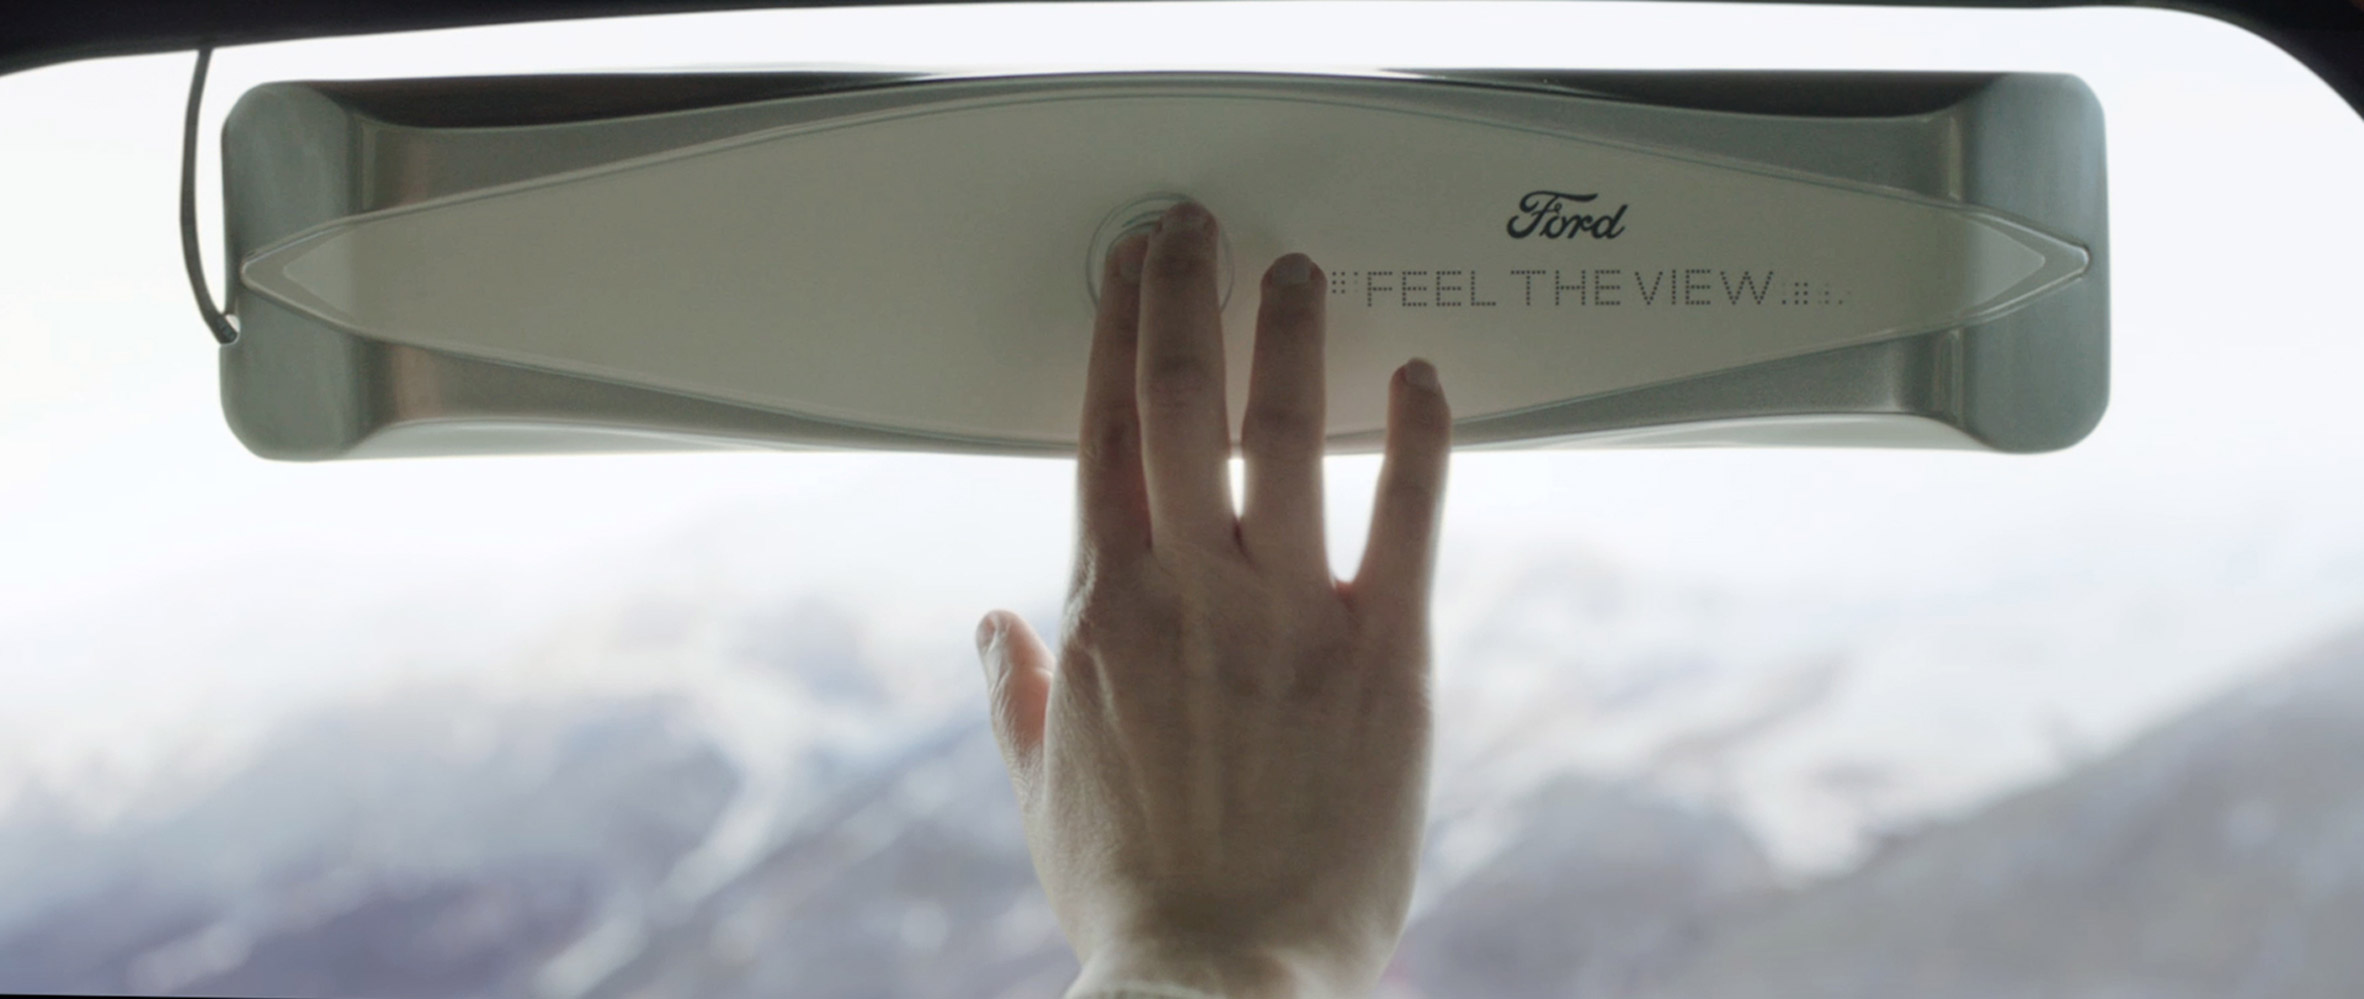 Ford's Feel the View smart window lets blind passengers admire the landscape